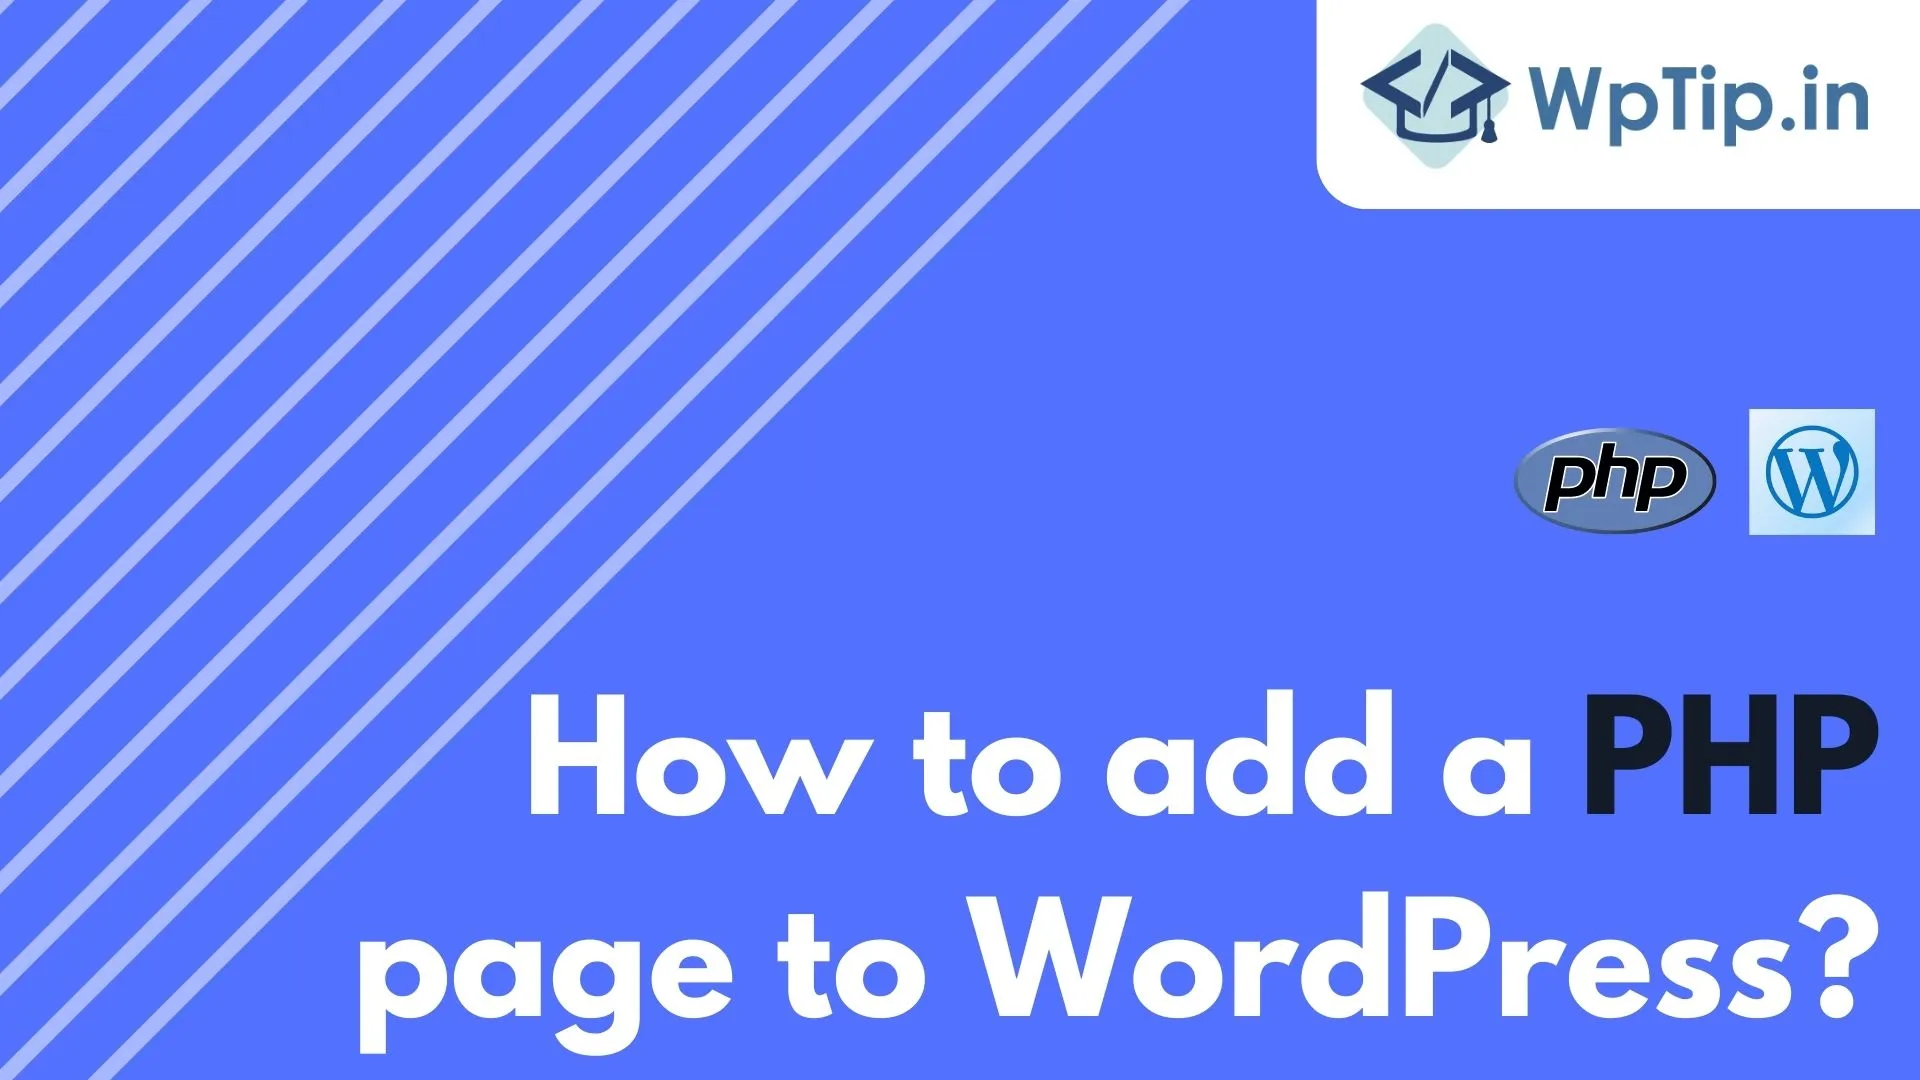 You are currently viewing How to add a PHP page to WordPress?